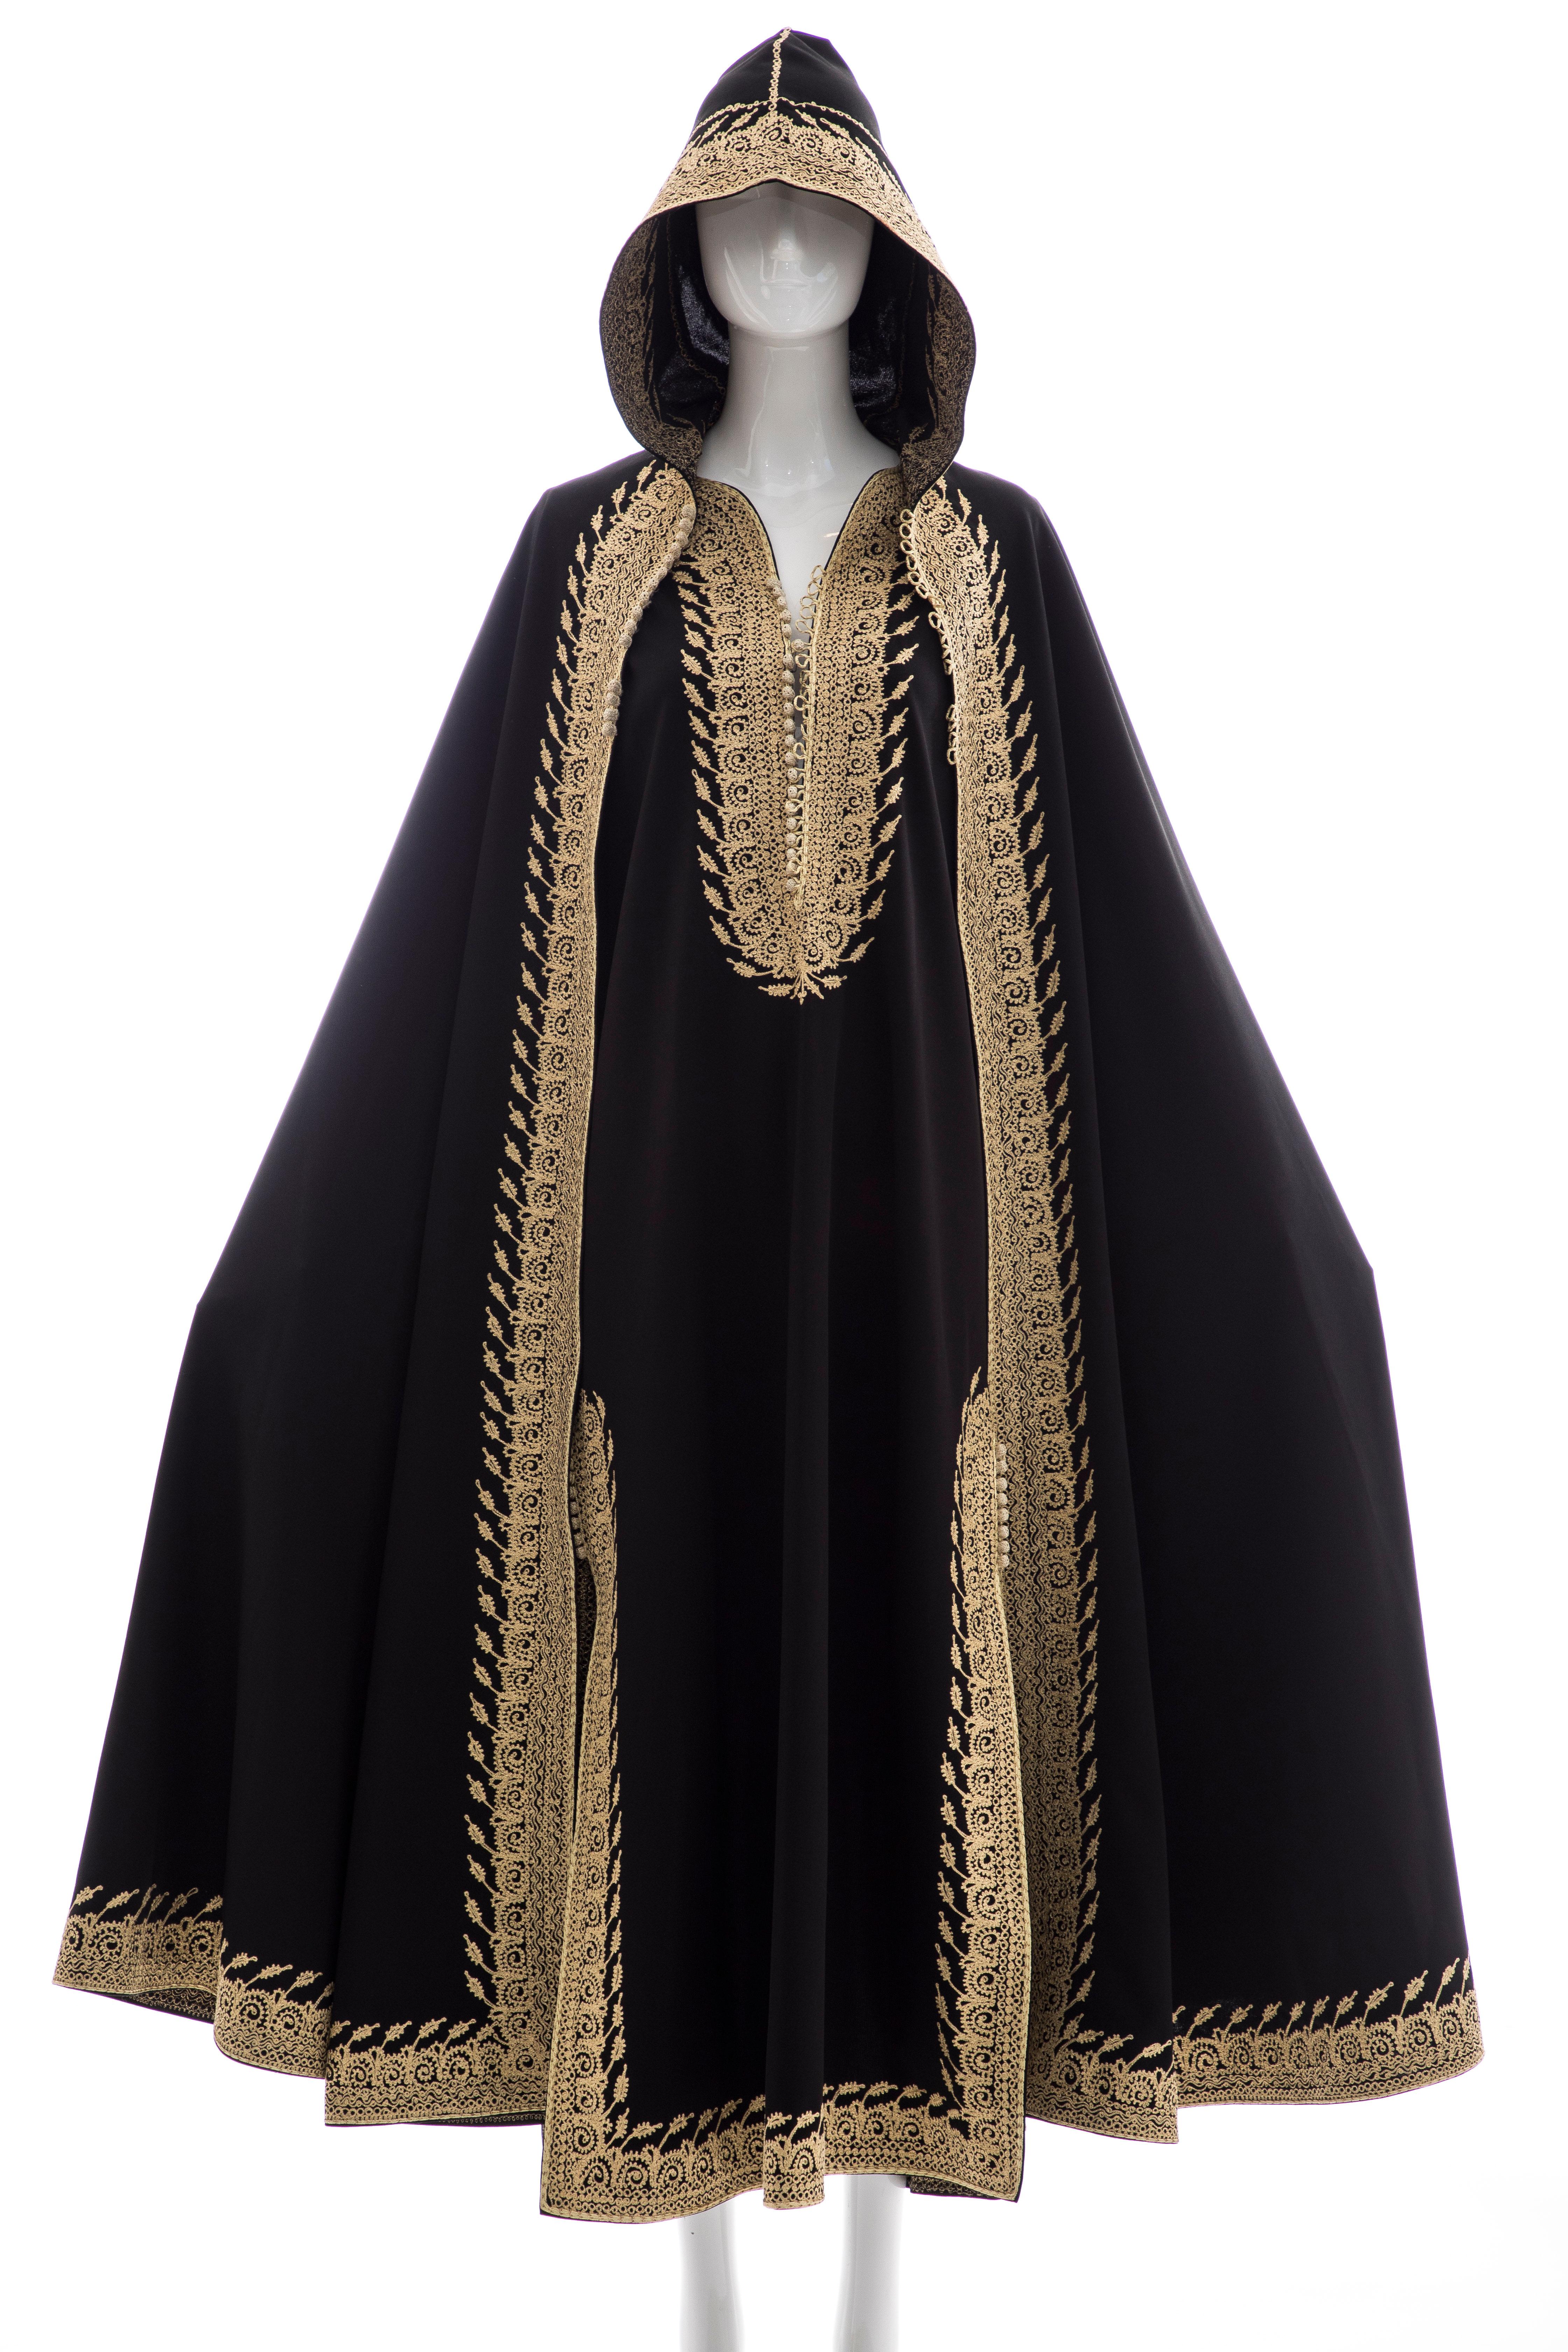 Moroccan Black Kaftan, circa: 1970's  front and side frog closures with gold embroidery, angel sleeves and separate embroidered hooded cape with frog closures.

No Size Label

Bust: 38, Waist: 37, Hips: 40, Length 54